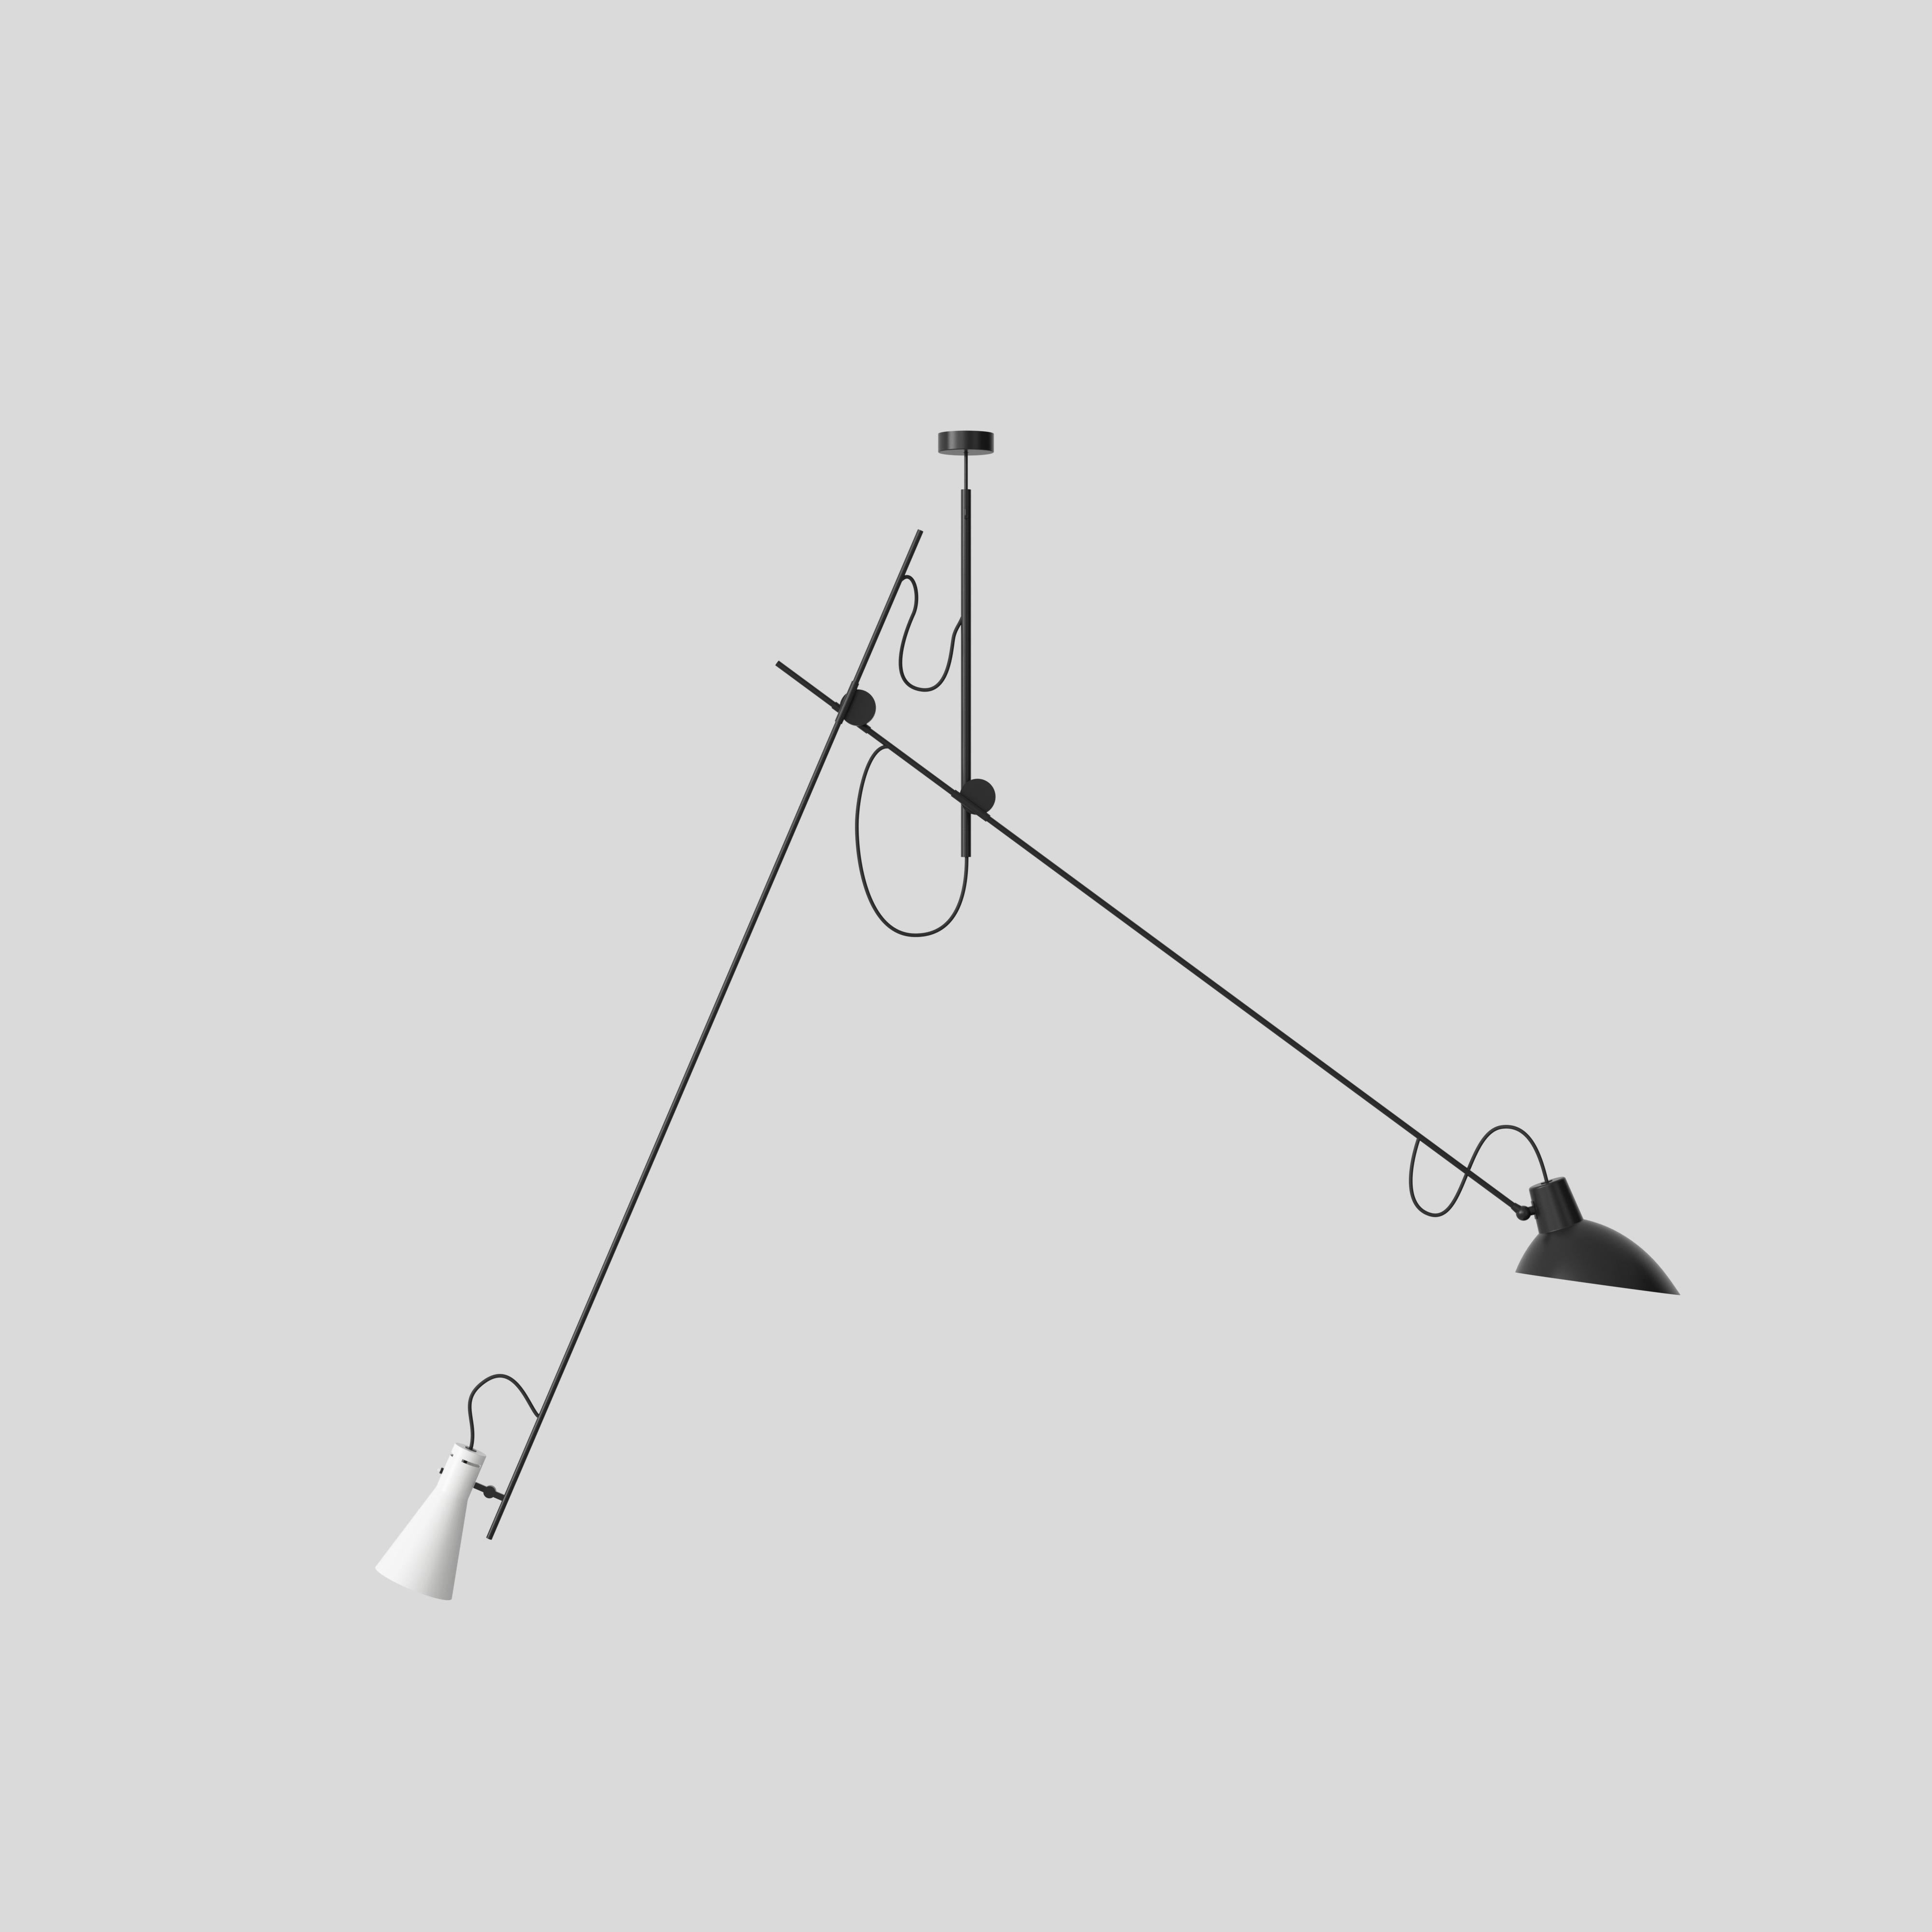 VV Cinquanta Suspension lamp
Design by Vittoriano Vigano
This version is with white and black lacquered reflectors and black frame.

The VV Cinquanta Suspension is elegant and versatile with two posable direct light sources.

With a